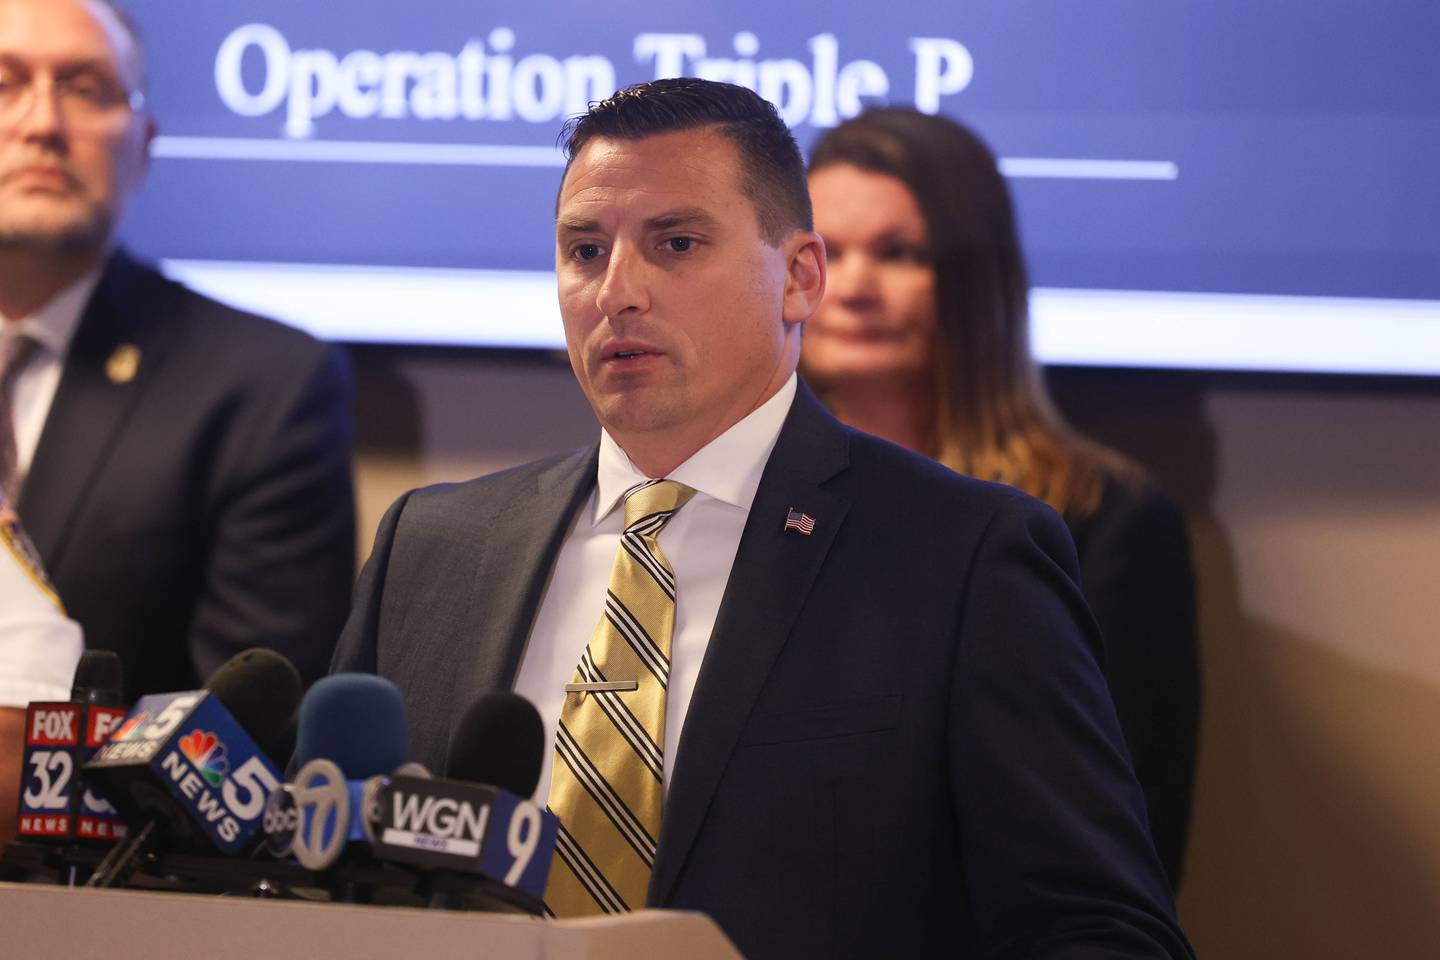 Joliet Detective James Kilgore speaks at a press conference regarding a joint operation that resulted in arrest and indictment of 25 defendants in a Paycheck Protection Program loan fraud. Wednesday, Sept. 21, 2022, in Joliet.